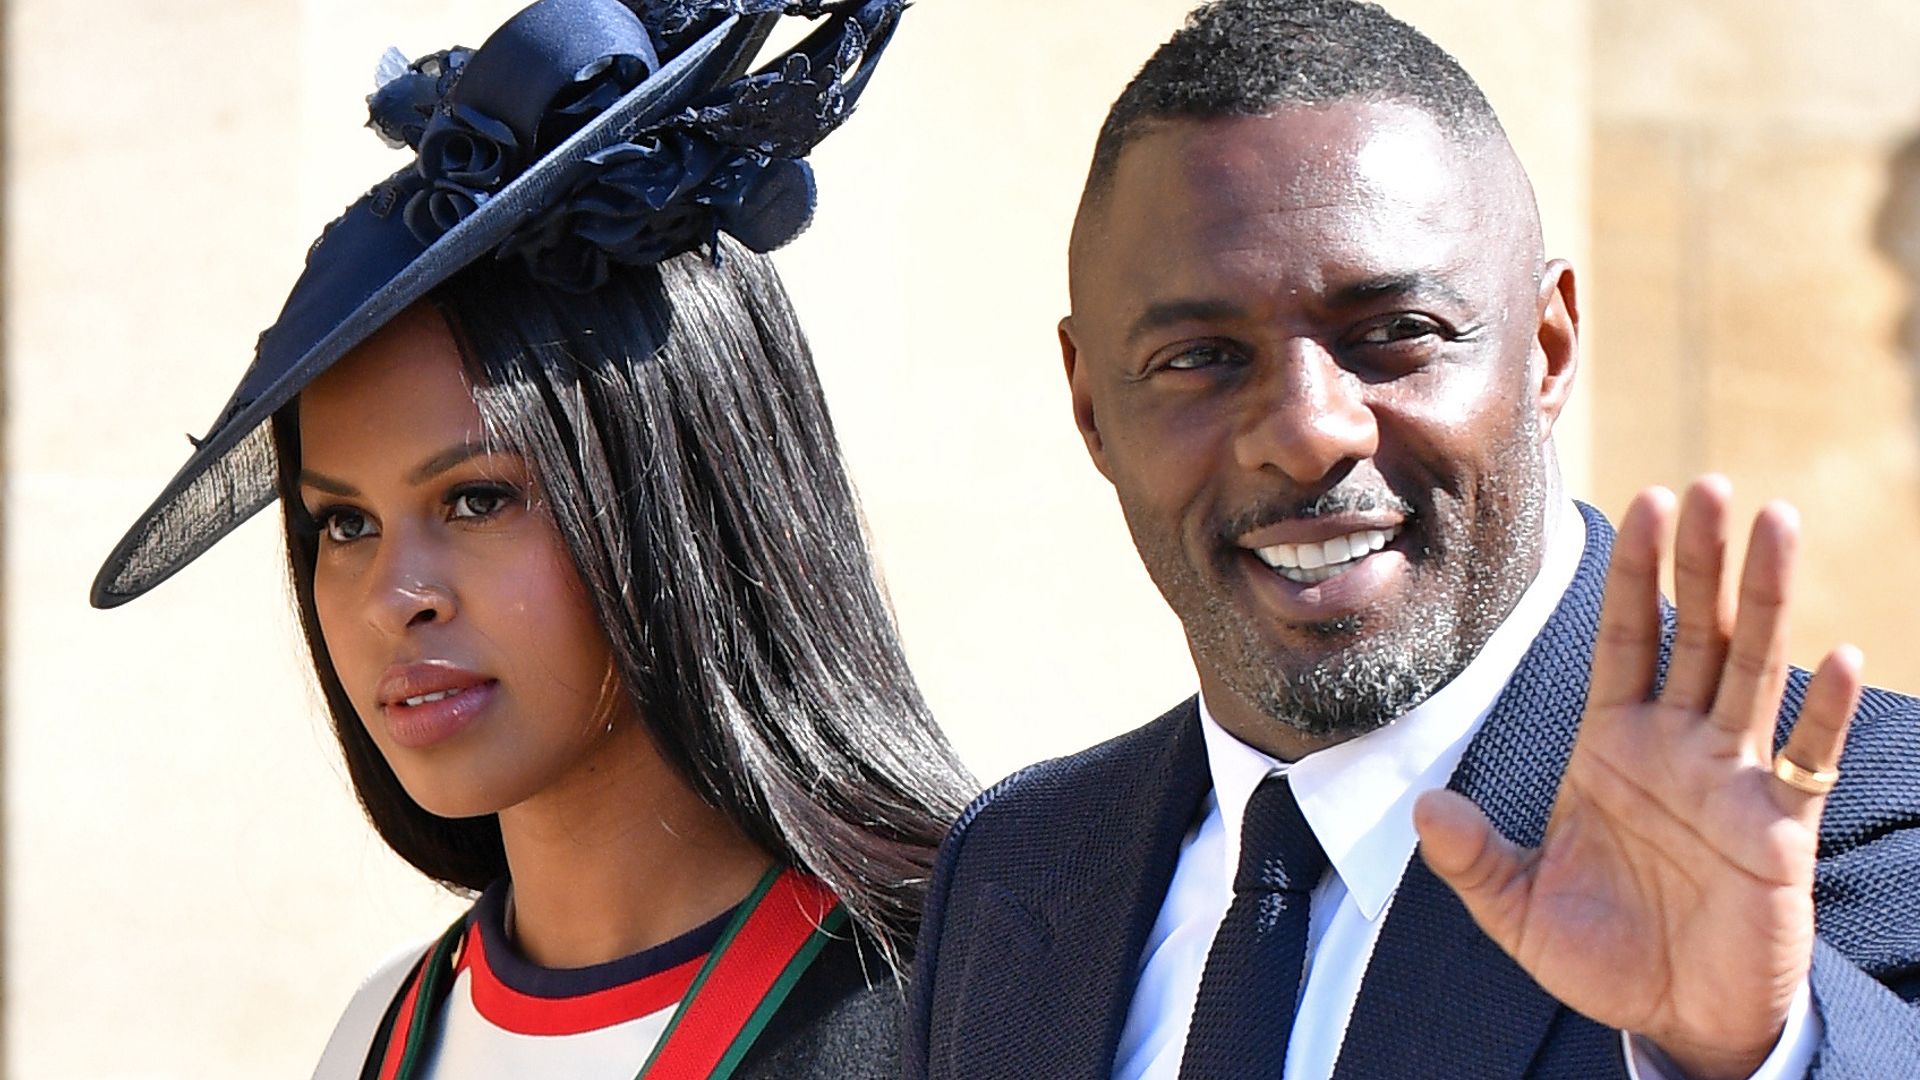 Idris Elba waving alongside his wife Sabrina as they attended the wedding of Prince Harry and Meghan Markle